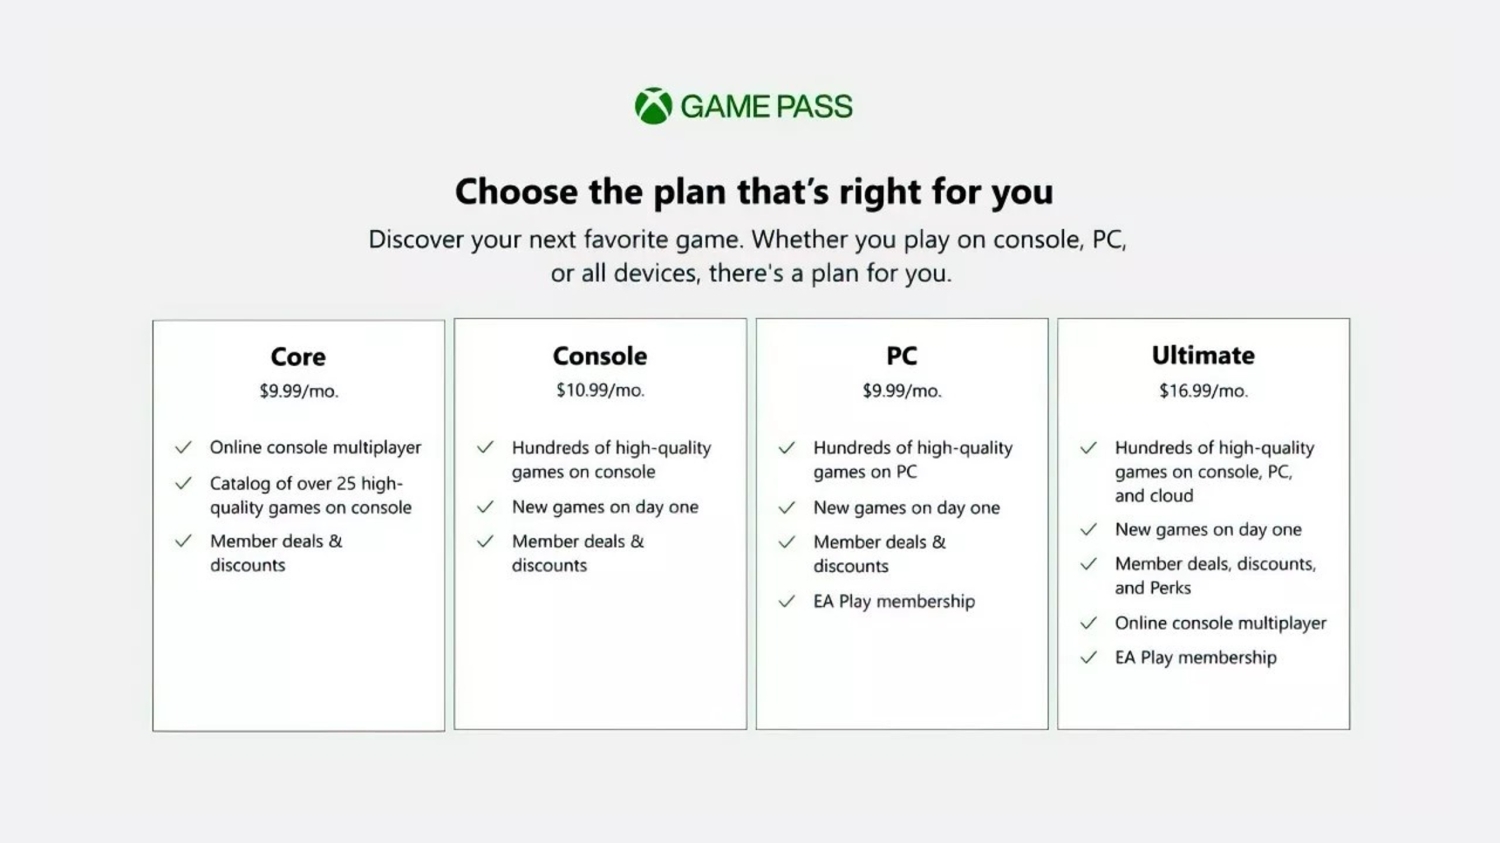 PC Game Pass is much better value than Xbox's new Game Pass Core console  tier